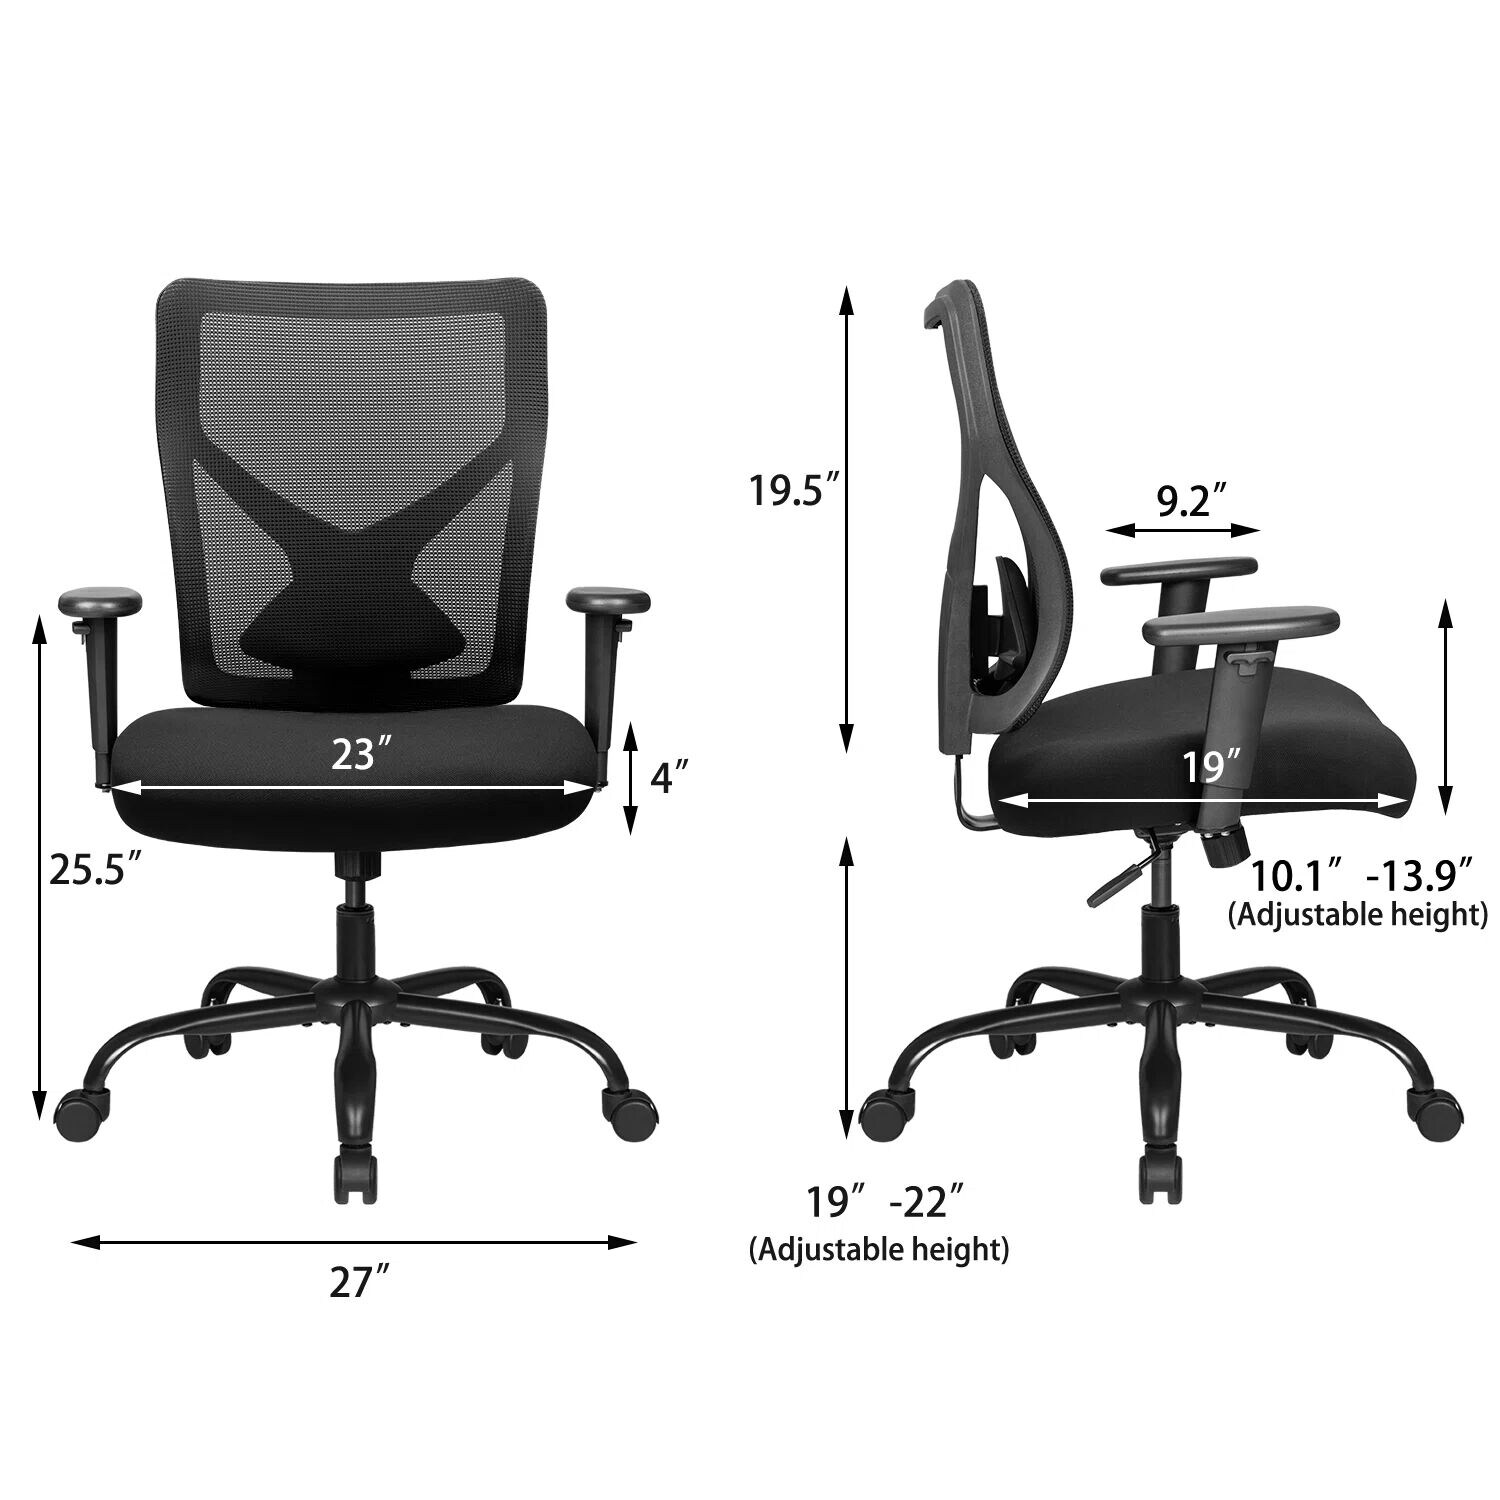 Vineego High Back PU Leather Executive Office Desk Chair Adjustable Business Managers Chair Ergonomic Swivel Computer Chair with